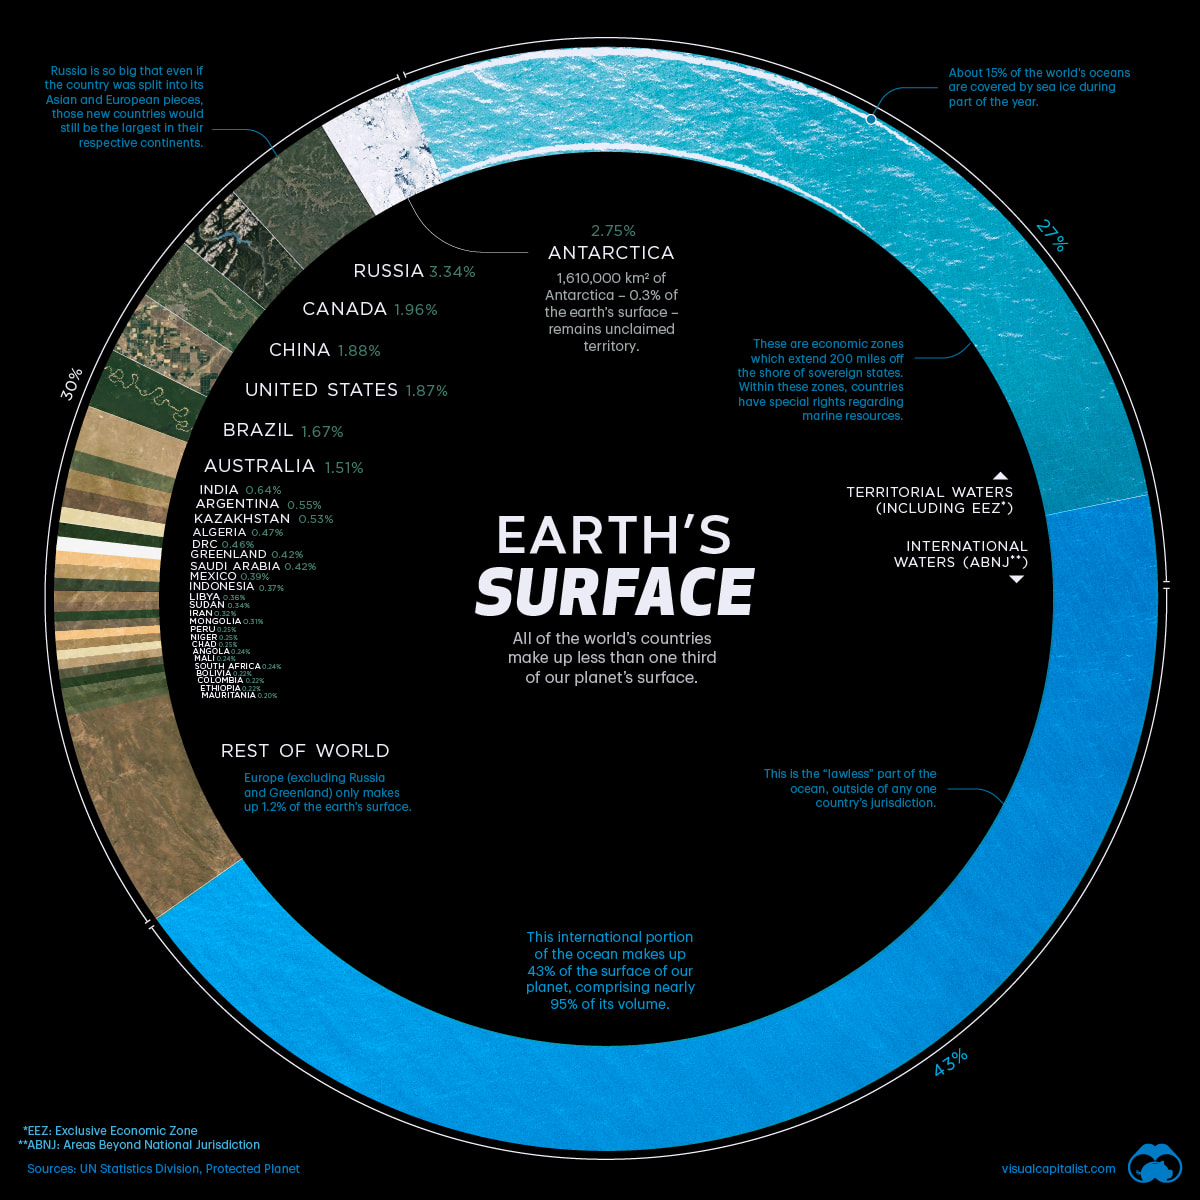 Visualizing Countries by Share of Earth’s Surface